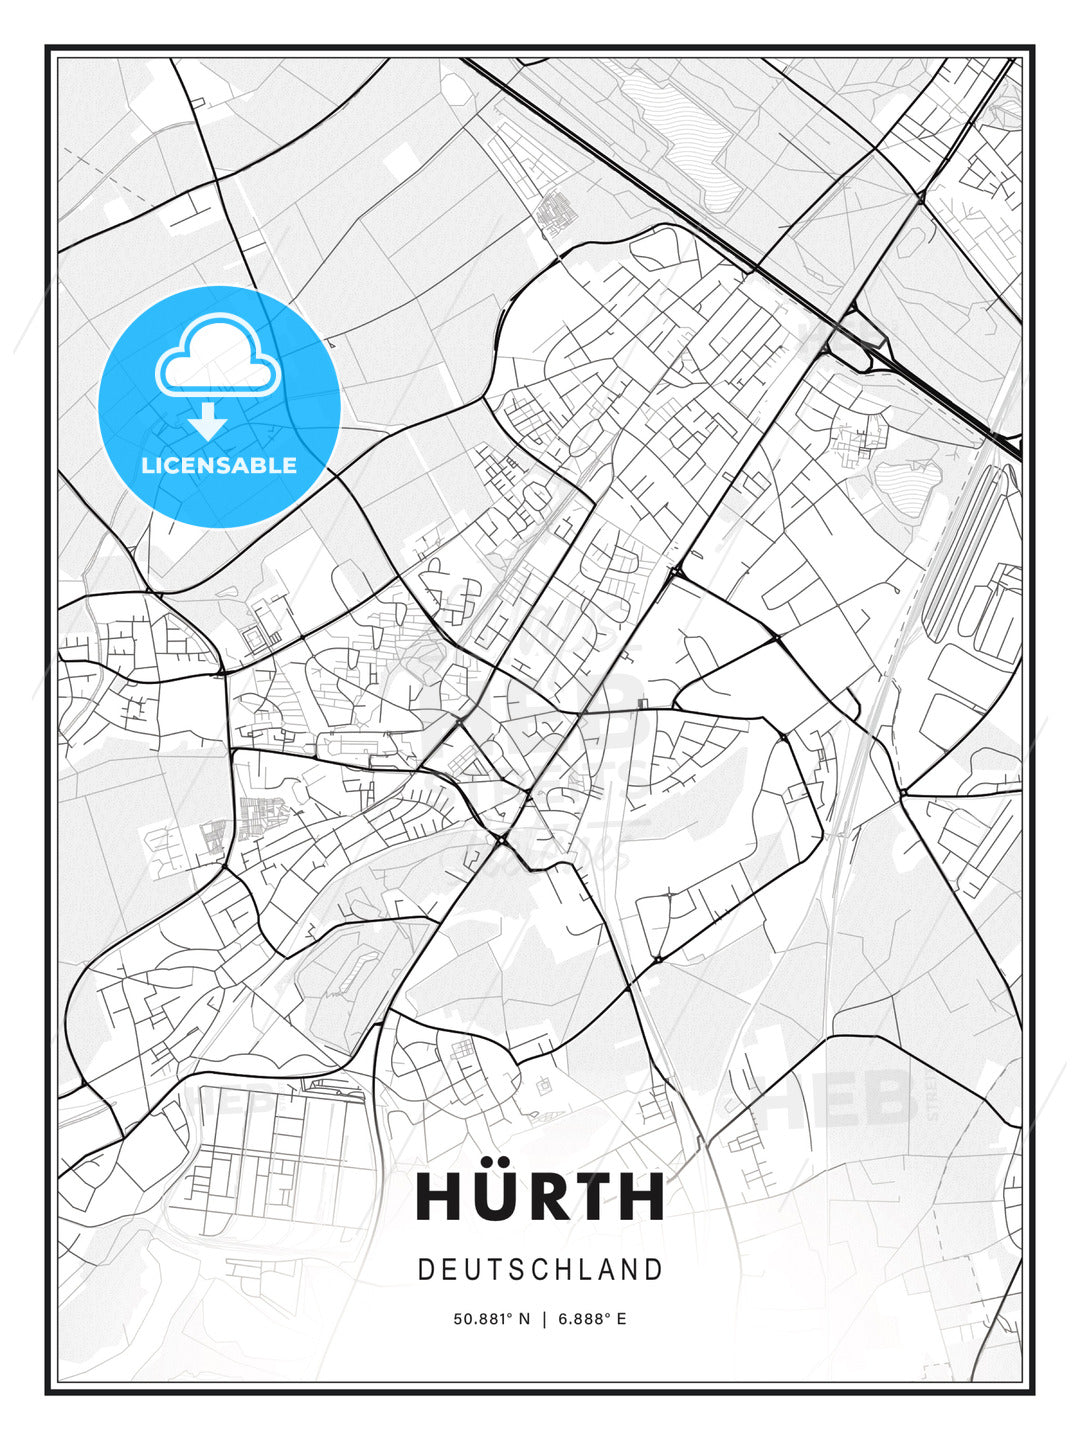 HÜRTH / Hurth, Germany, Modern Print Template in Various Formats - HEBSTREITS Sketches